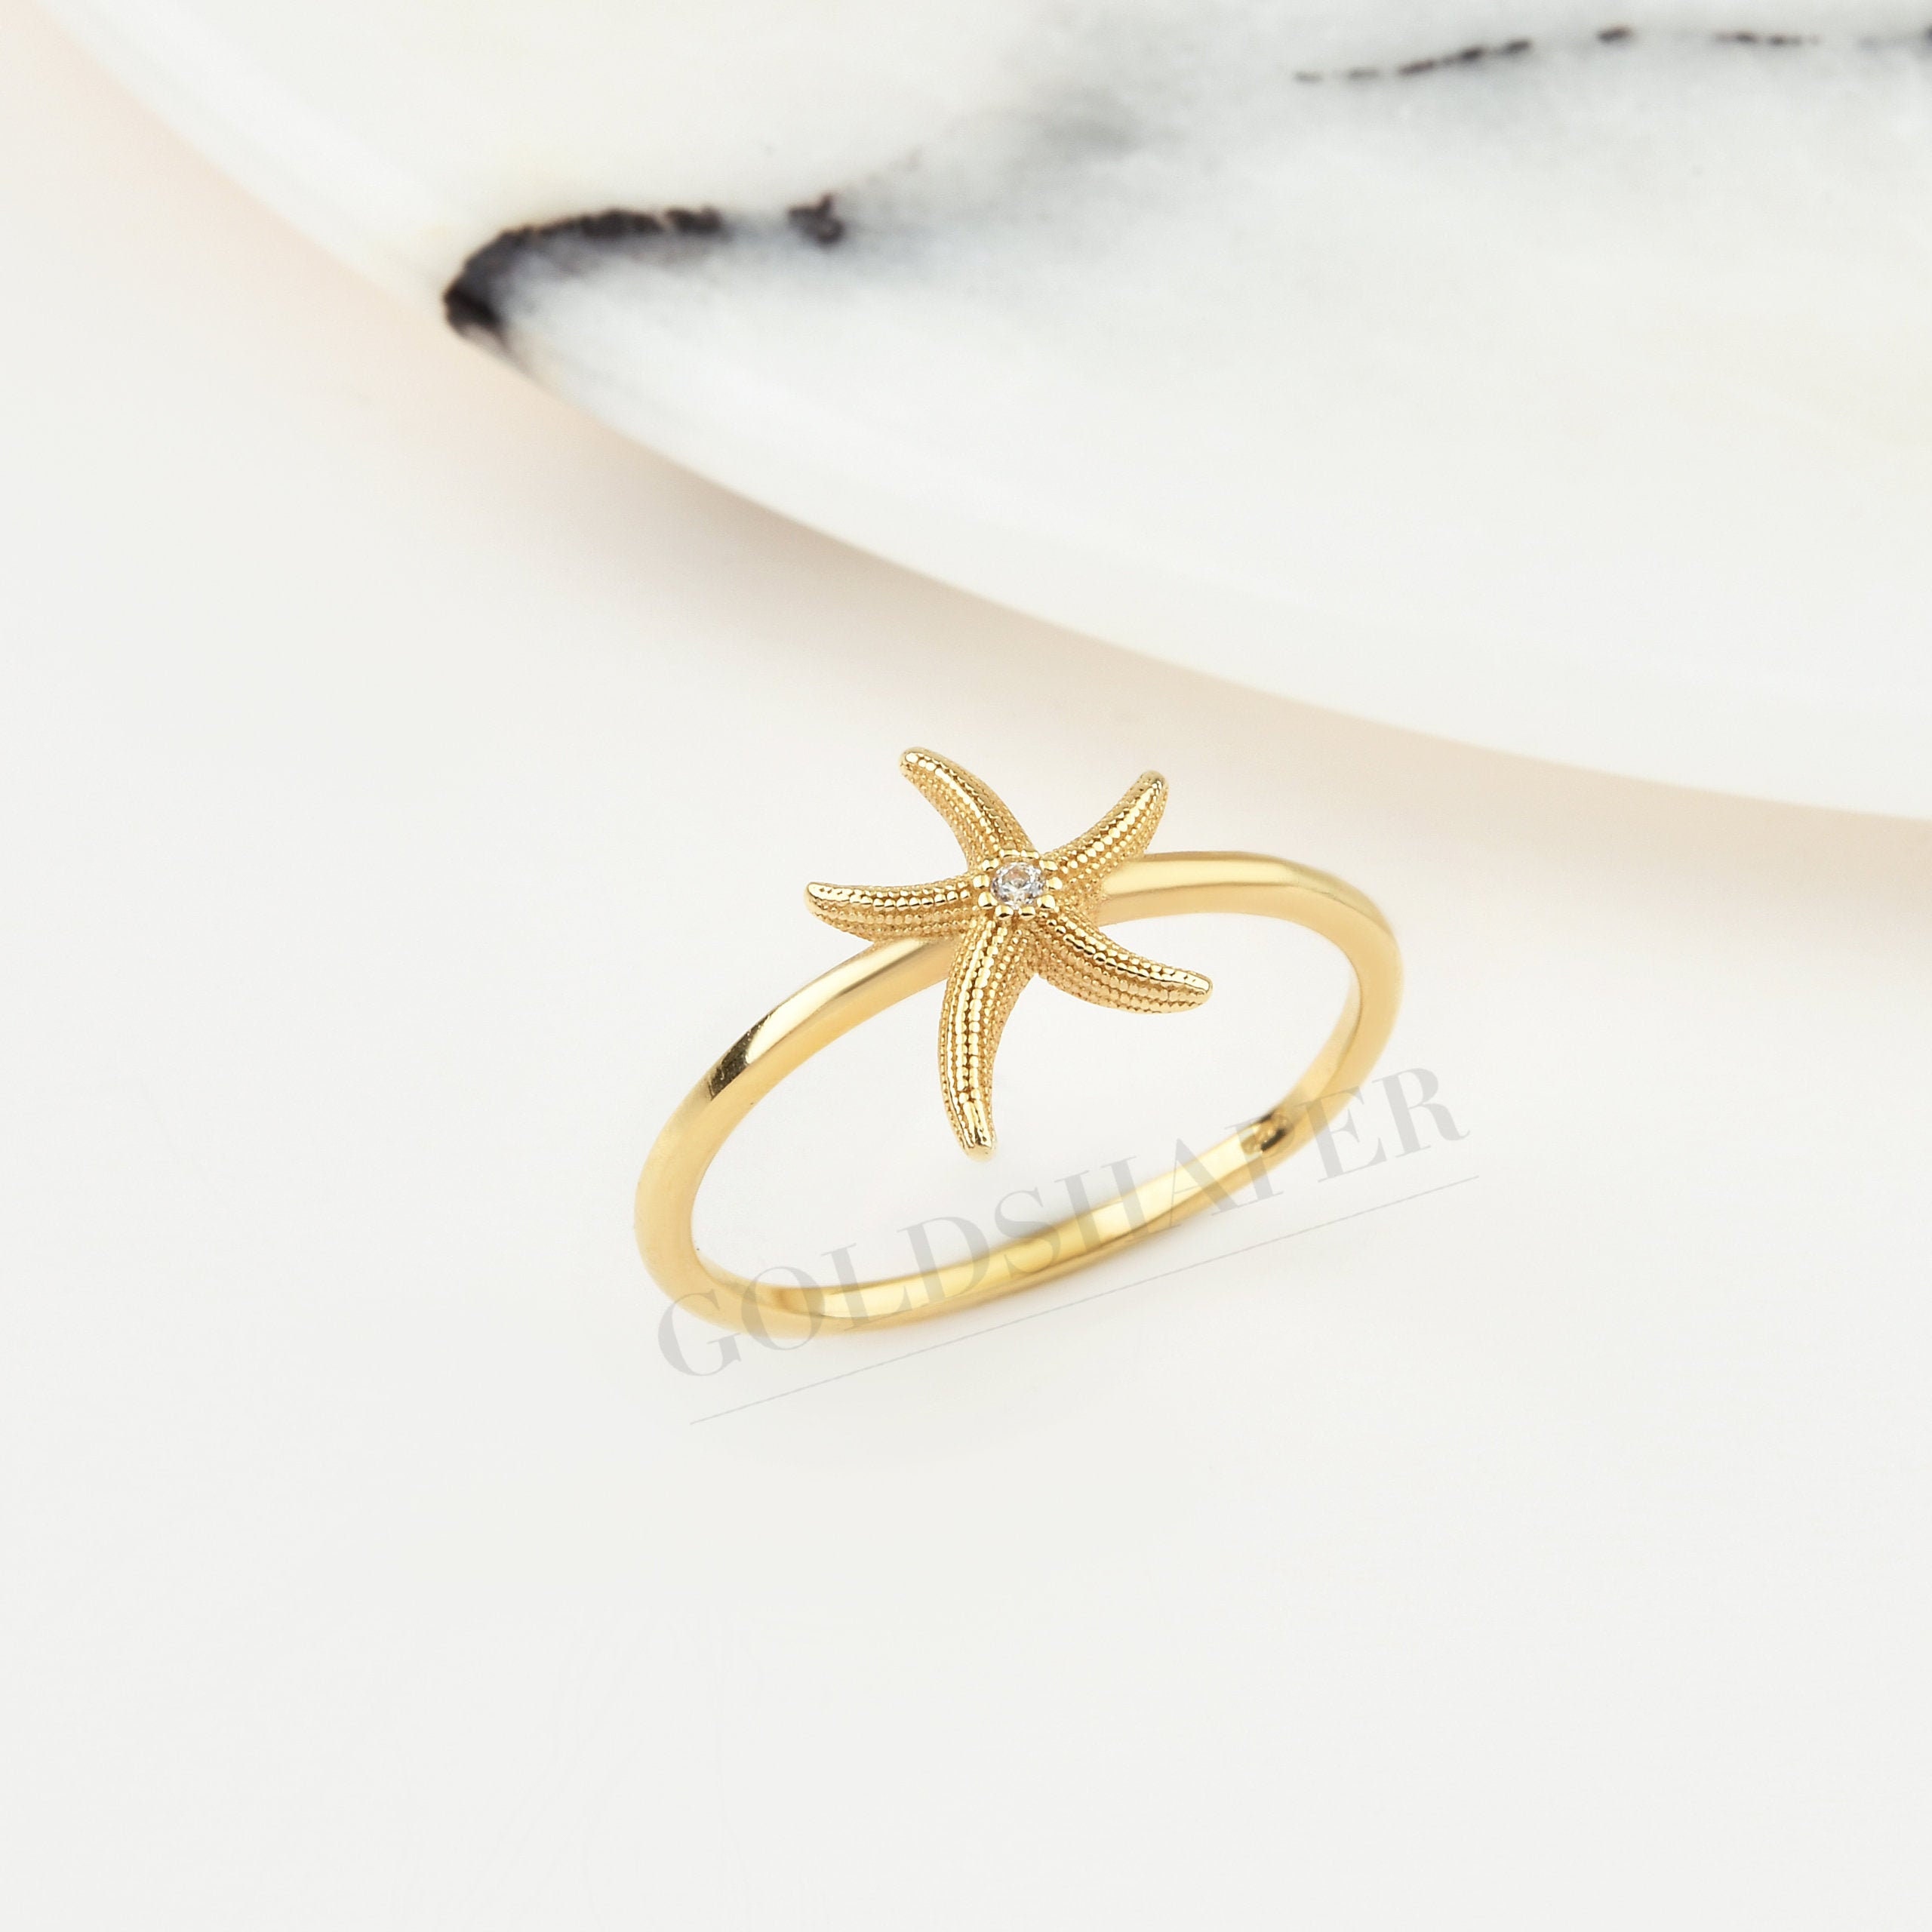 starfish Ring, 14K Solid Gold Ocean Jewelry, Birthday Gift, Gift For Her, Christmas Gift